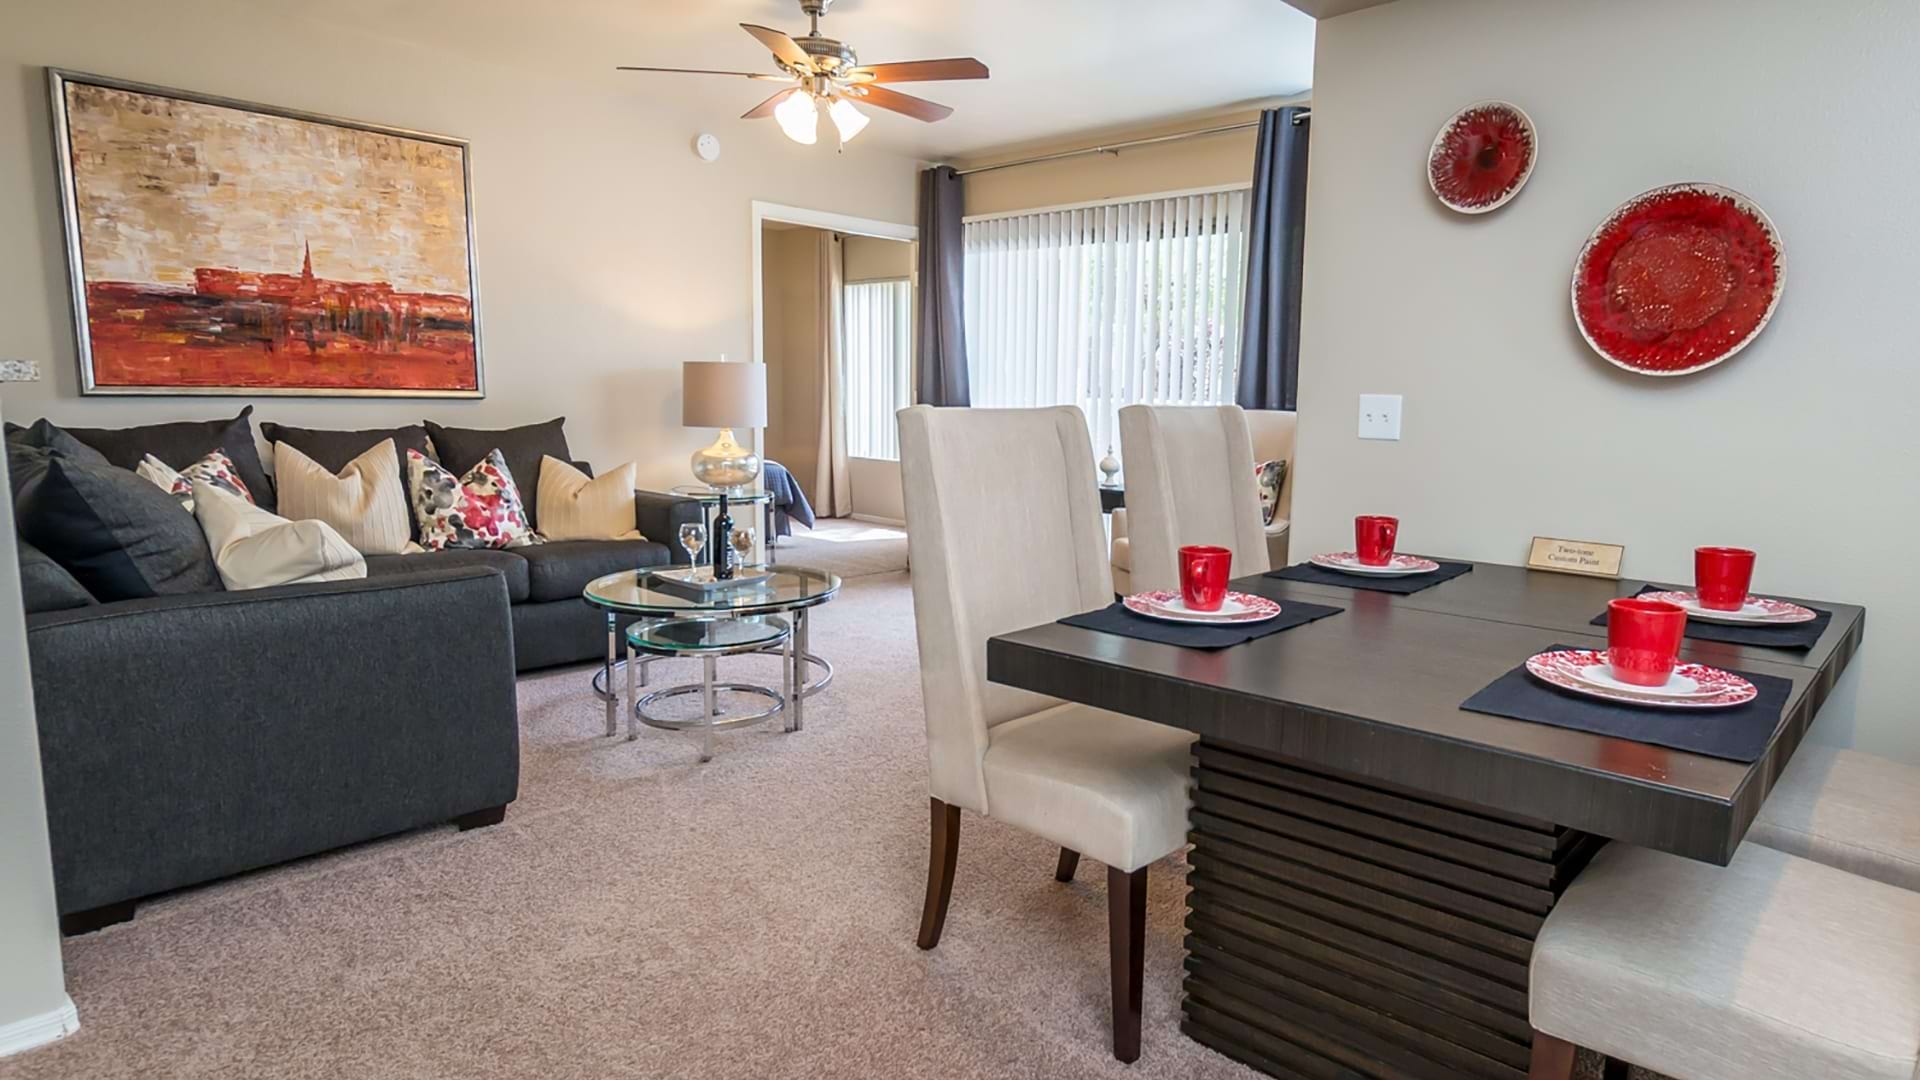 Modern Living Room with a Private Balcony at Our Apartments Near Glendale, AZ